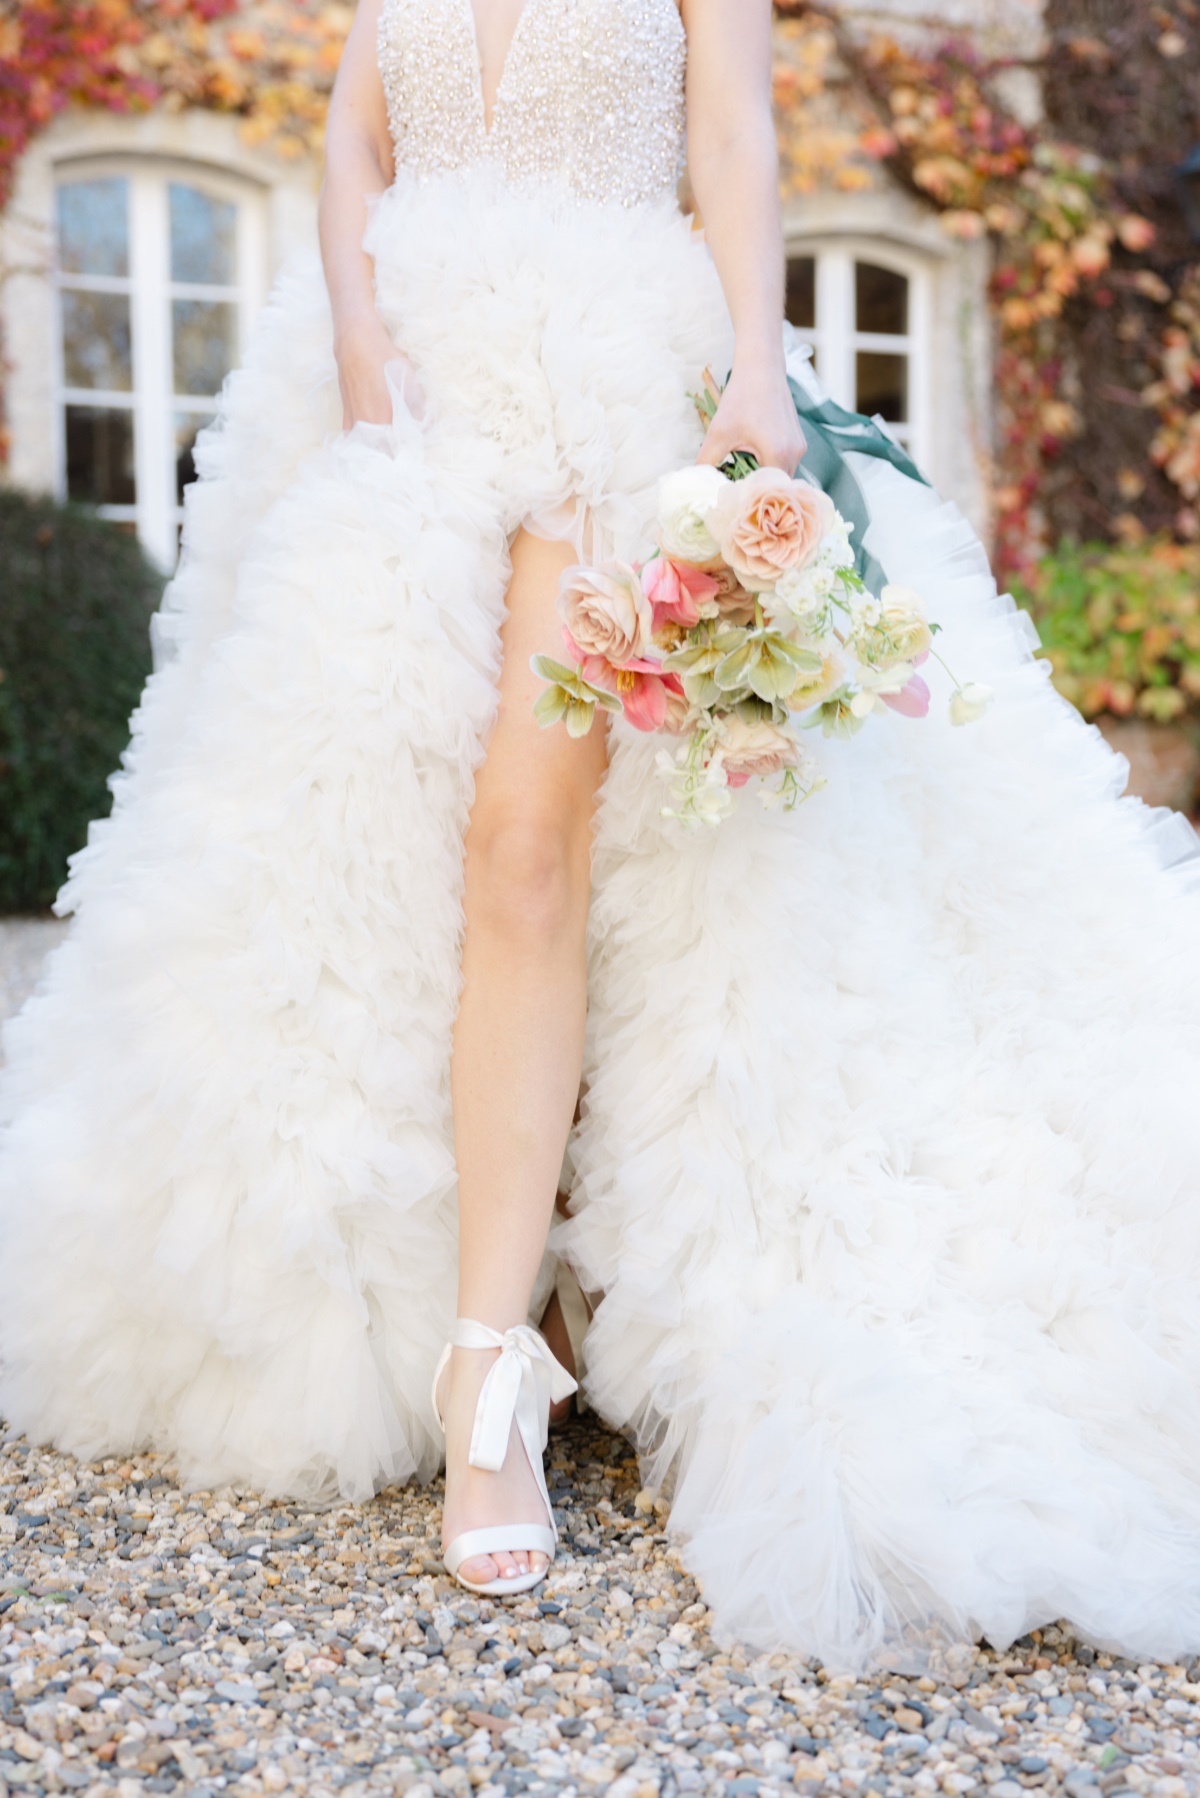 Demetrios wedding gown with ruffled tulle skirt and bow heels